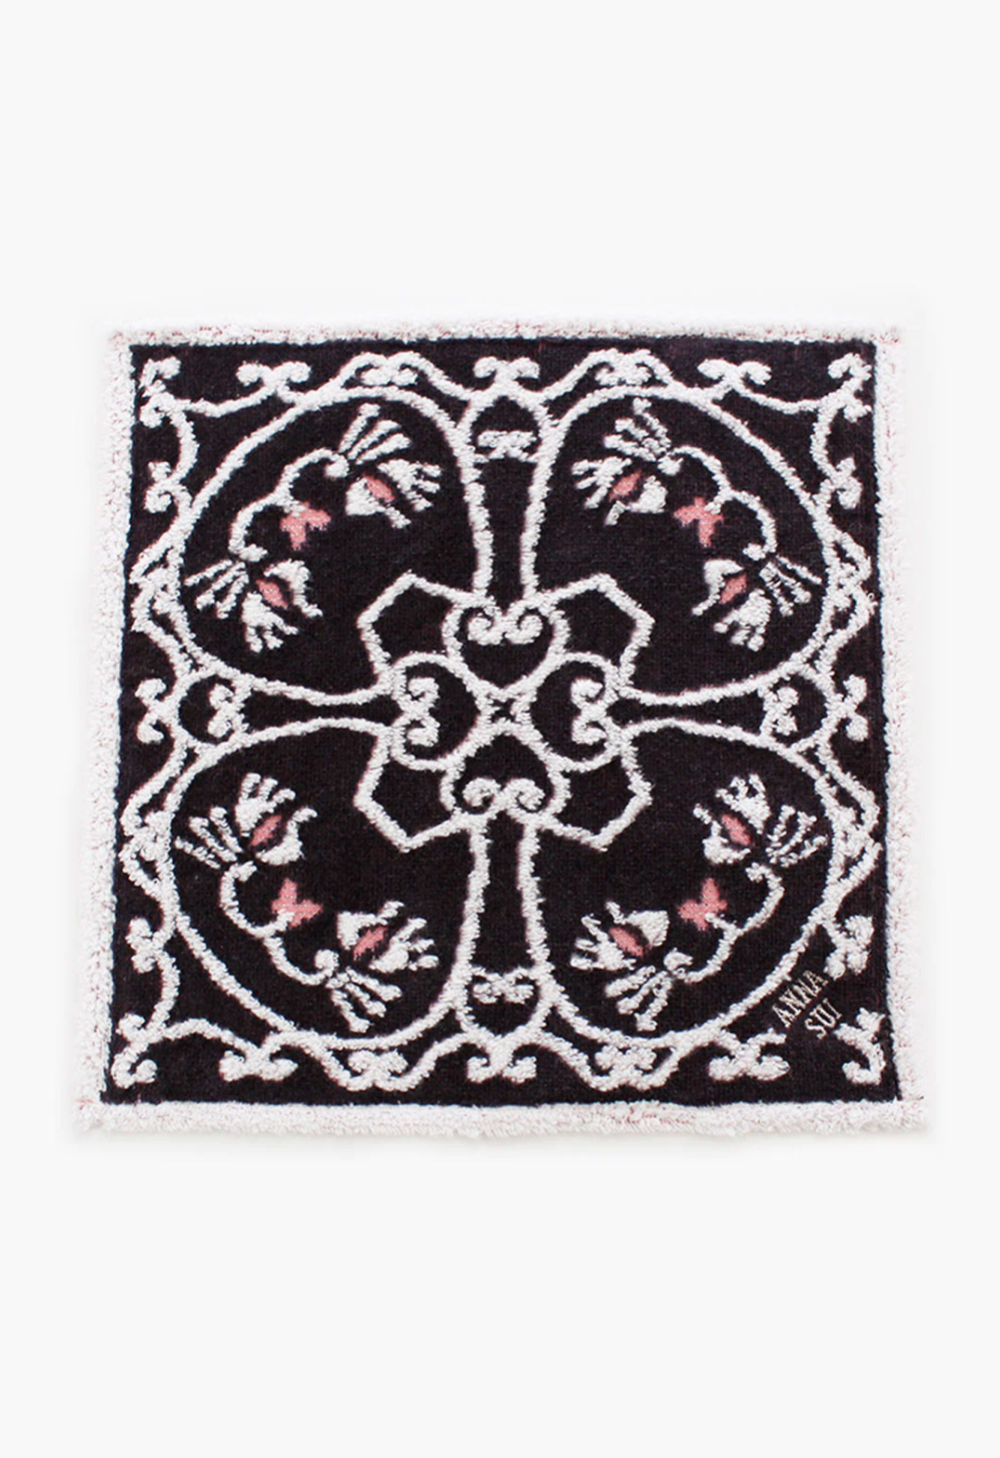 Cat Pattern Washcloth in black, 4 white/pink cat patterns in clover frame, Anna Sui' label in corner 